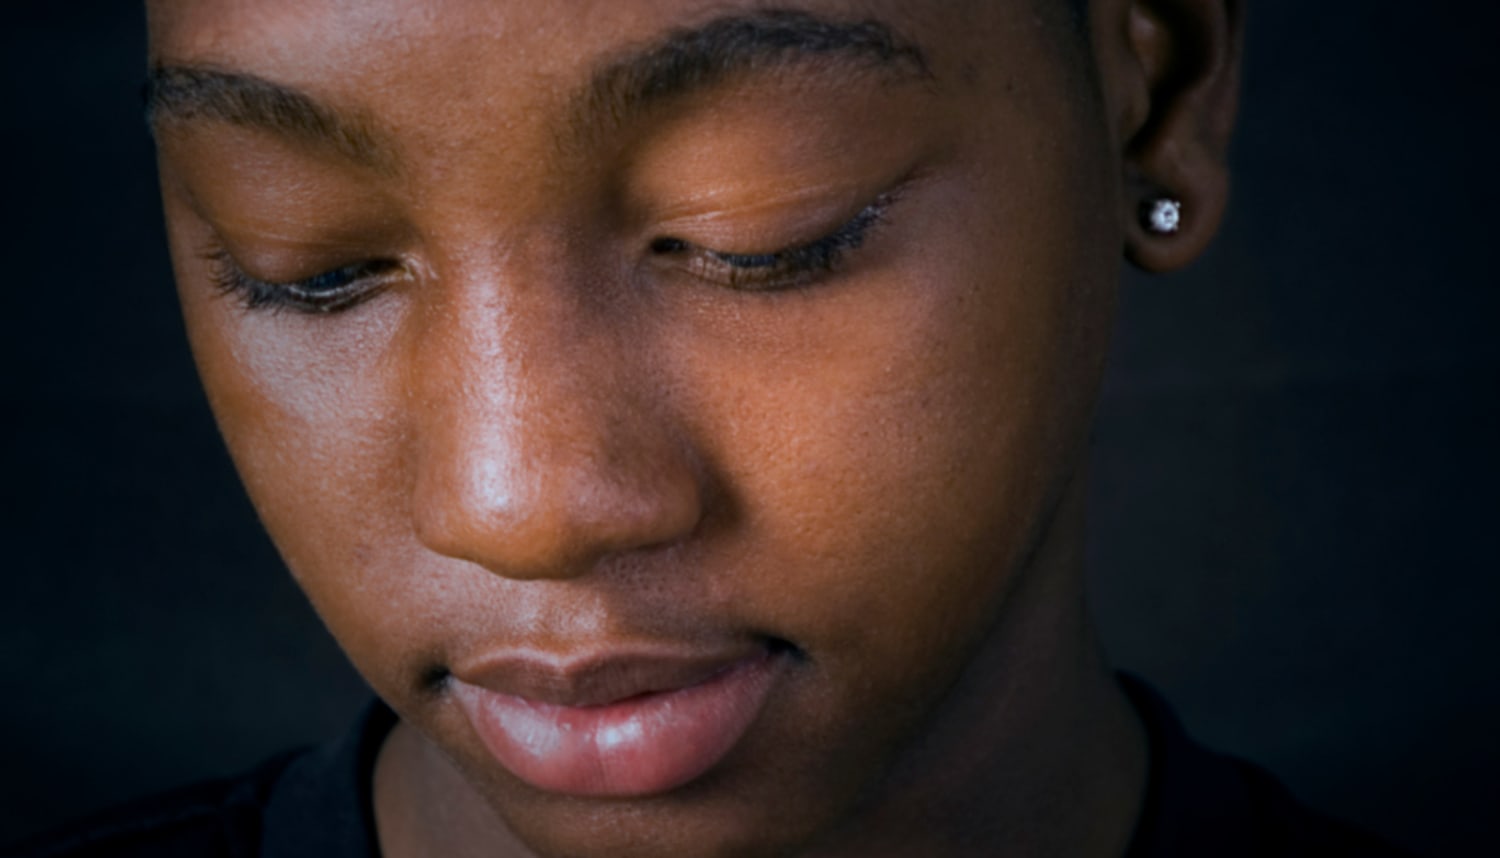 Can racial identity shield Black teens from stress of racism?